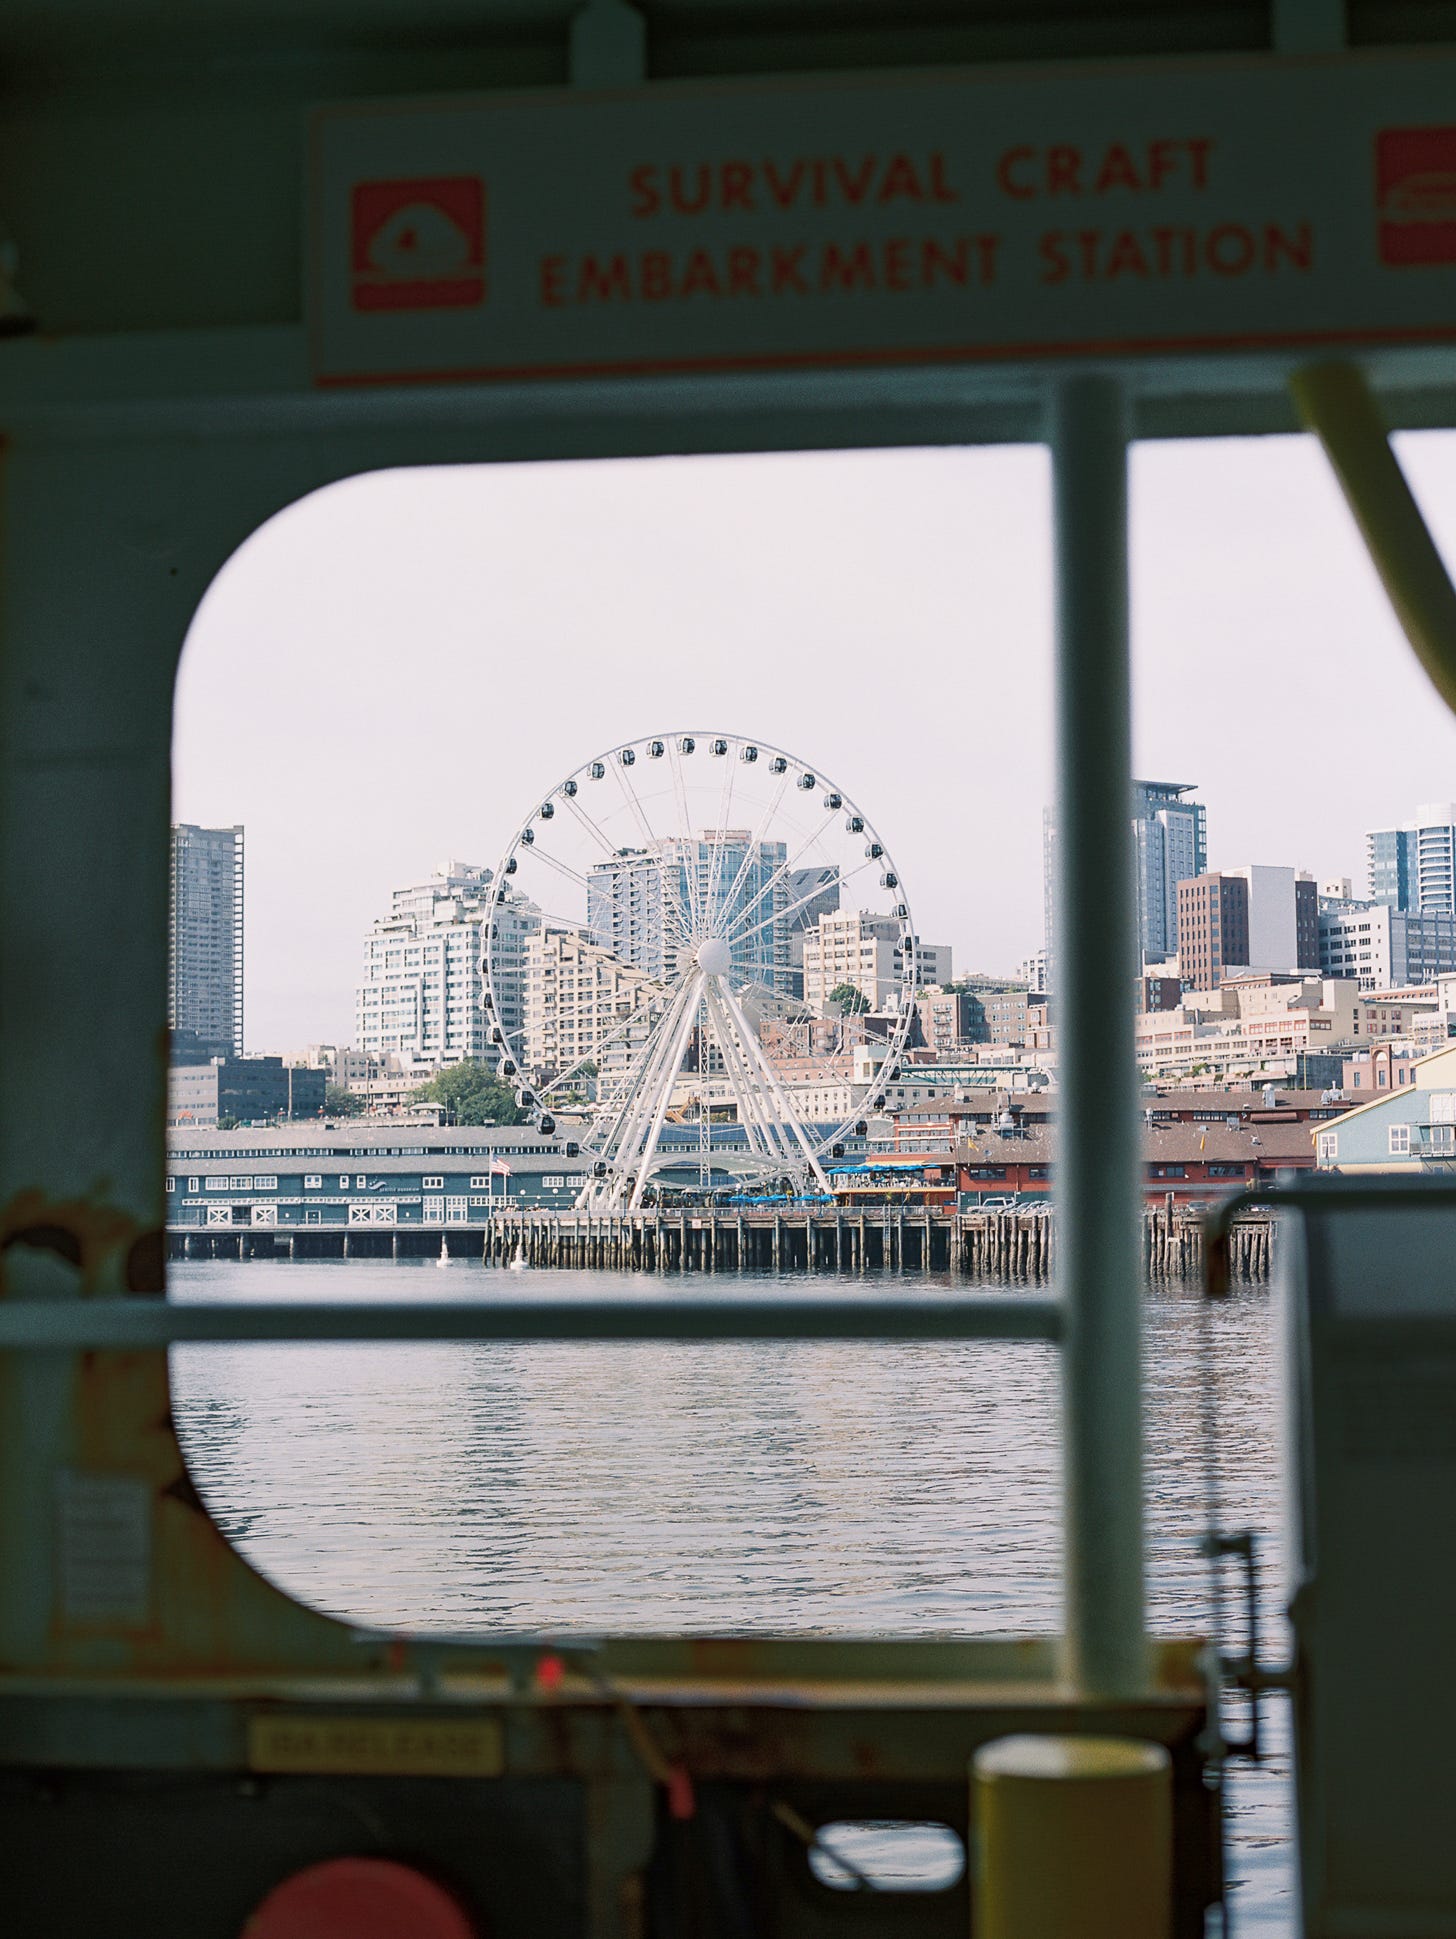 Photo of a ferris wheel, as seen from the window of a ferry